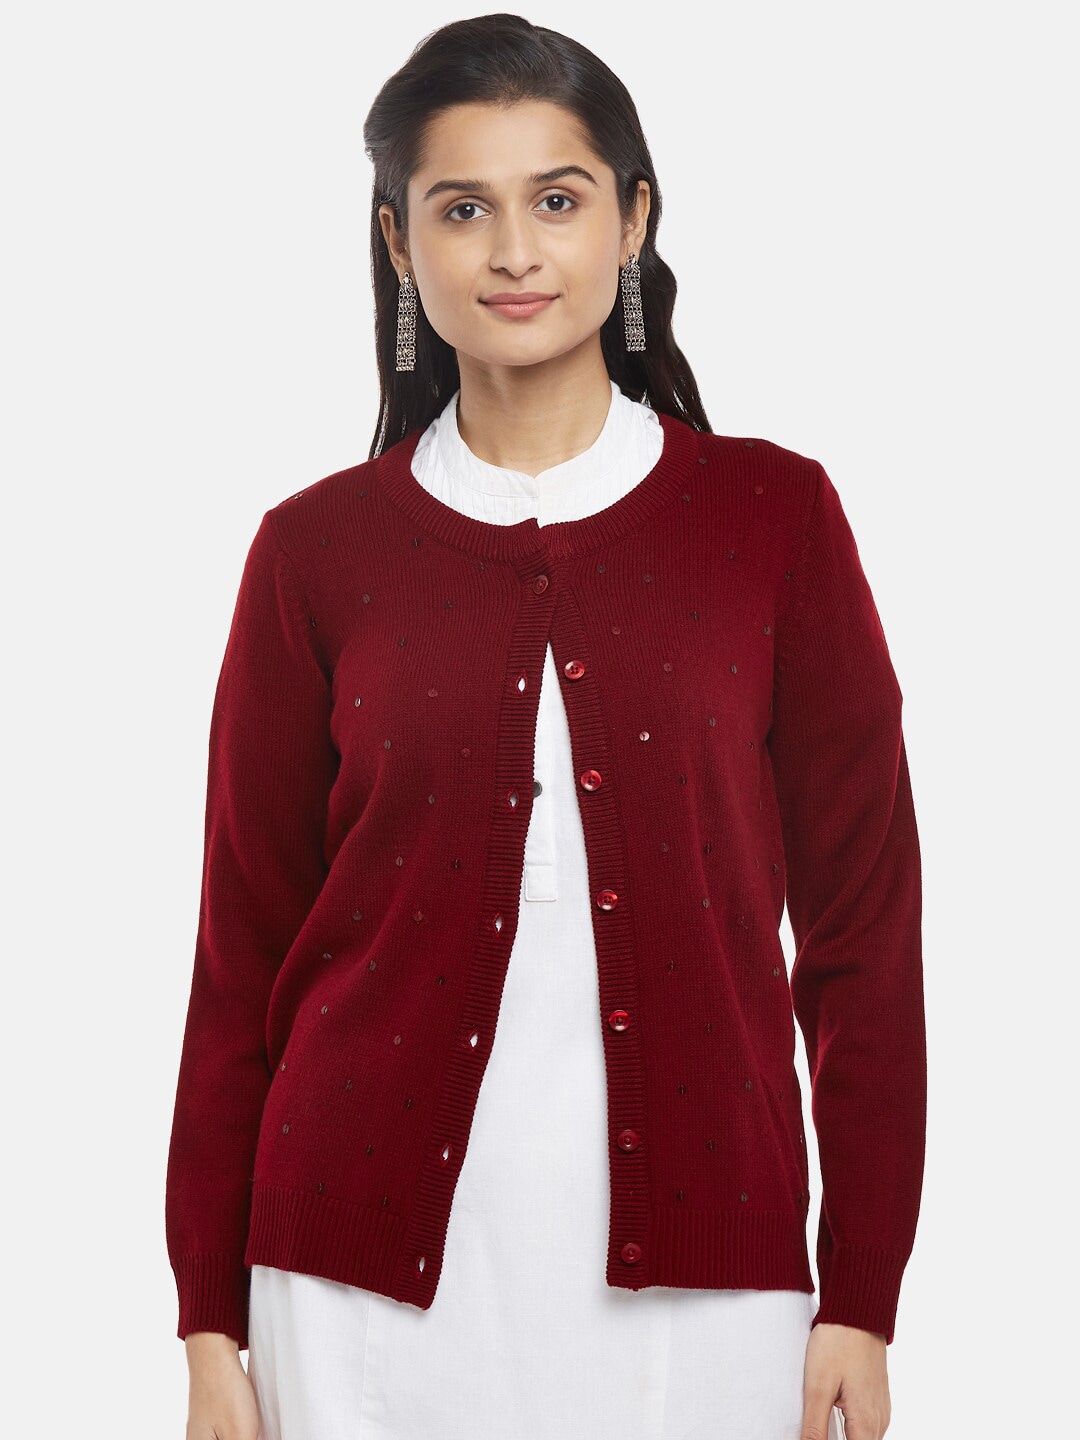 RANGMANCH BY PANTALOONS Women Maroon Ribbed Acrylic Cardigan with Embellished Detail Price in India